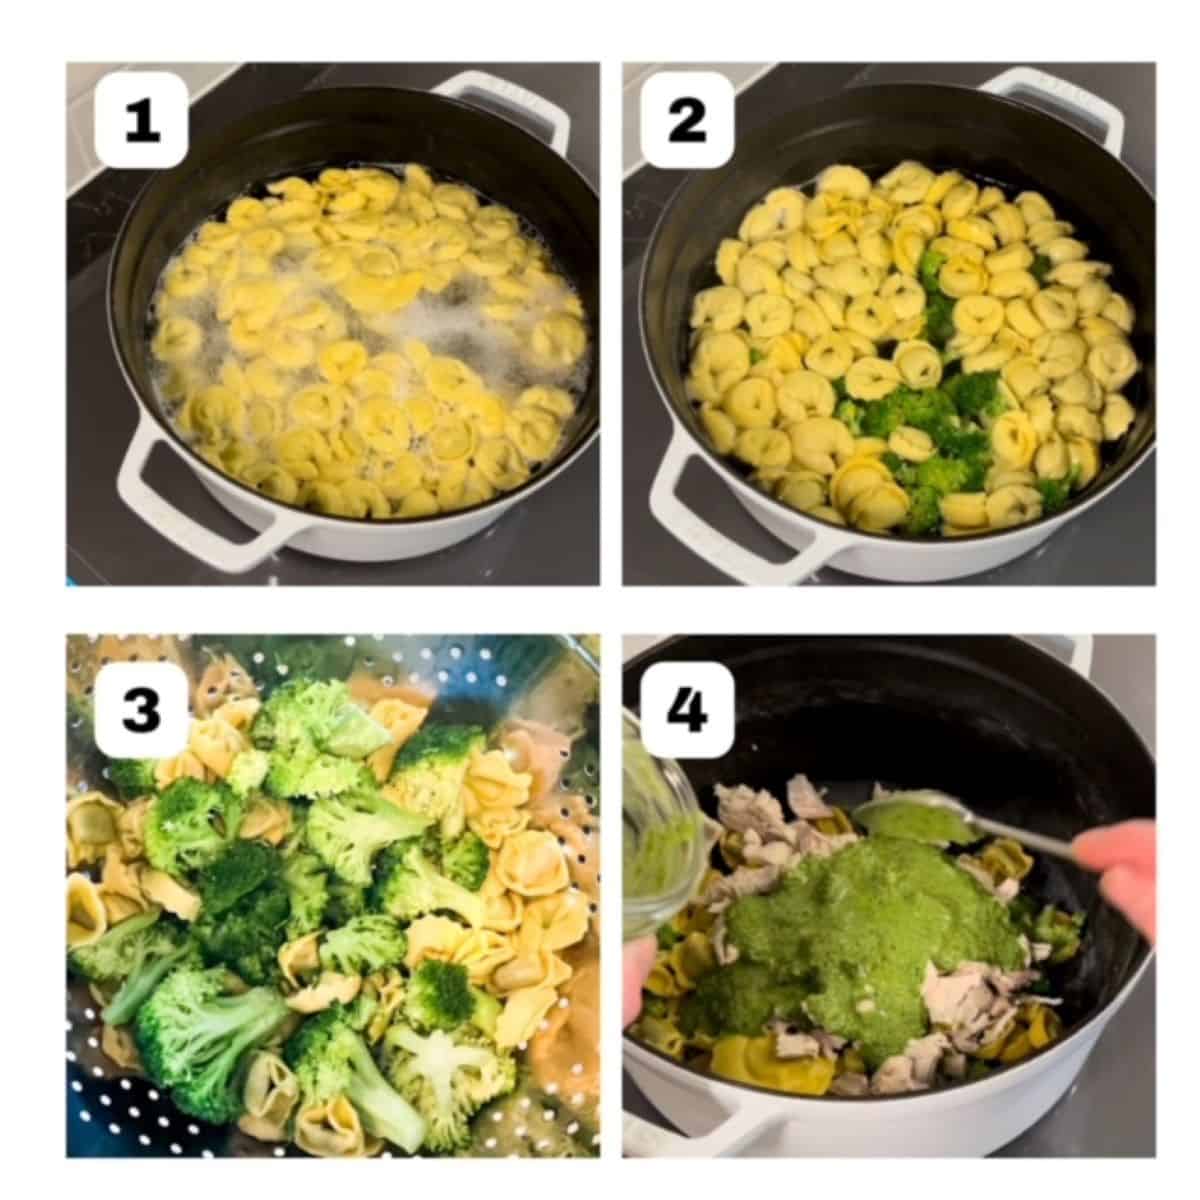 Four process shots, numbered: tortellini boiling in water, broccoli added to the tortellini in water, tortellini and broccoli in a strainer, tortellini, broccoli, and chicken topped with pesto. 